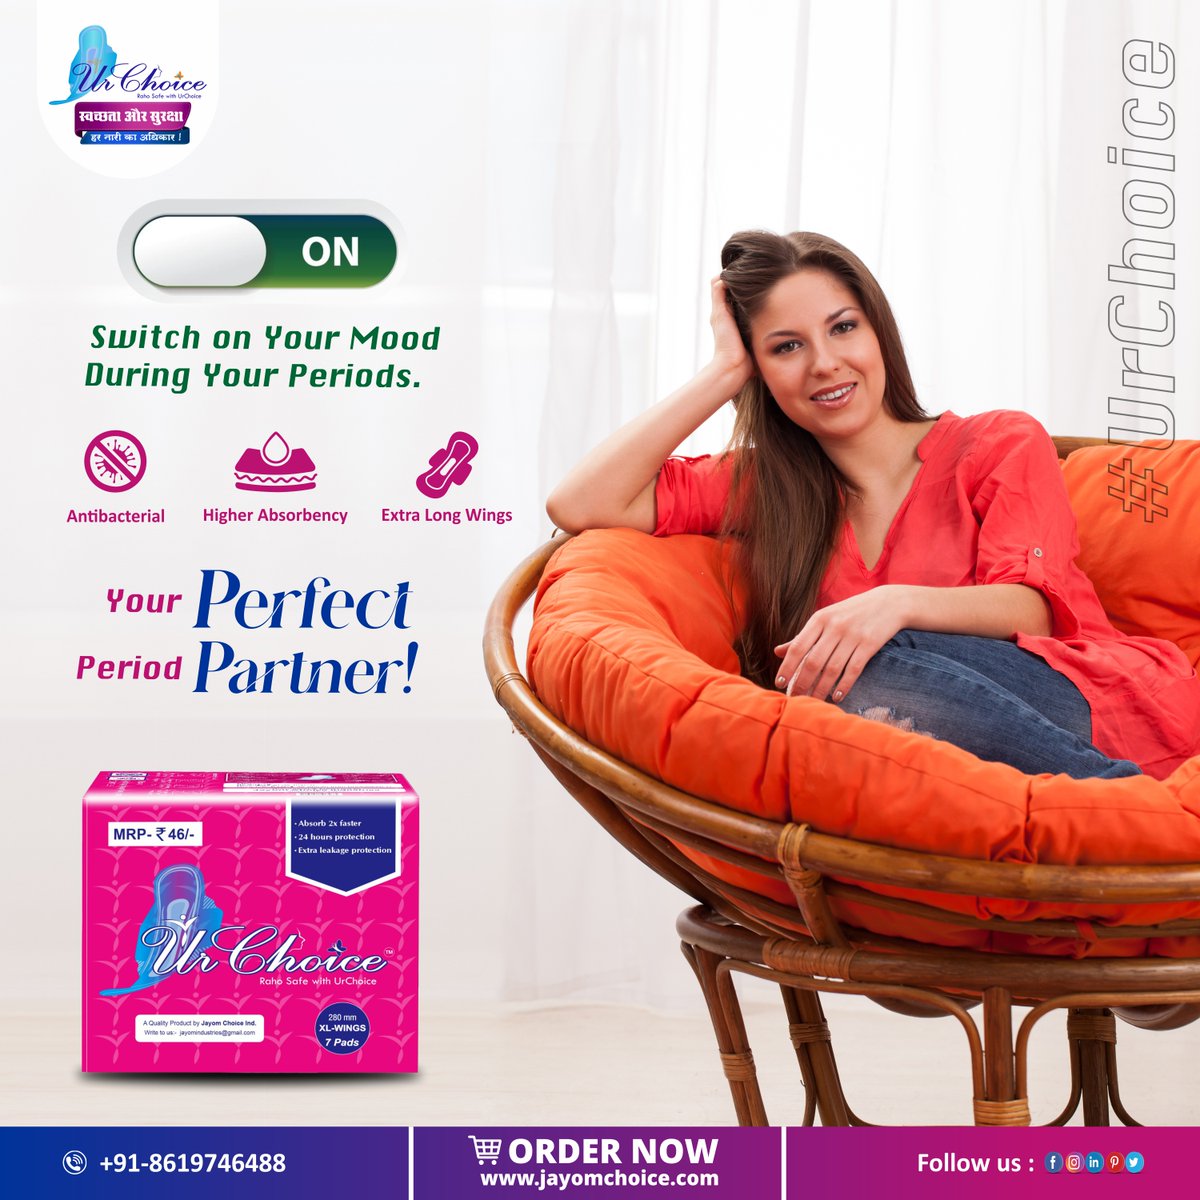 Switch ON your Mood during your Periods. Meet your Perfect Period Partner ever. Ur Choice sanitary pads, designed for your comfort & peace of mind.
Order Now : jayomchoice.com
#urchoice #PeriodProtection #leakagefree #comfort #Absorption #Period #SanitaryPads #AadhaarCard